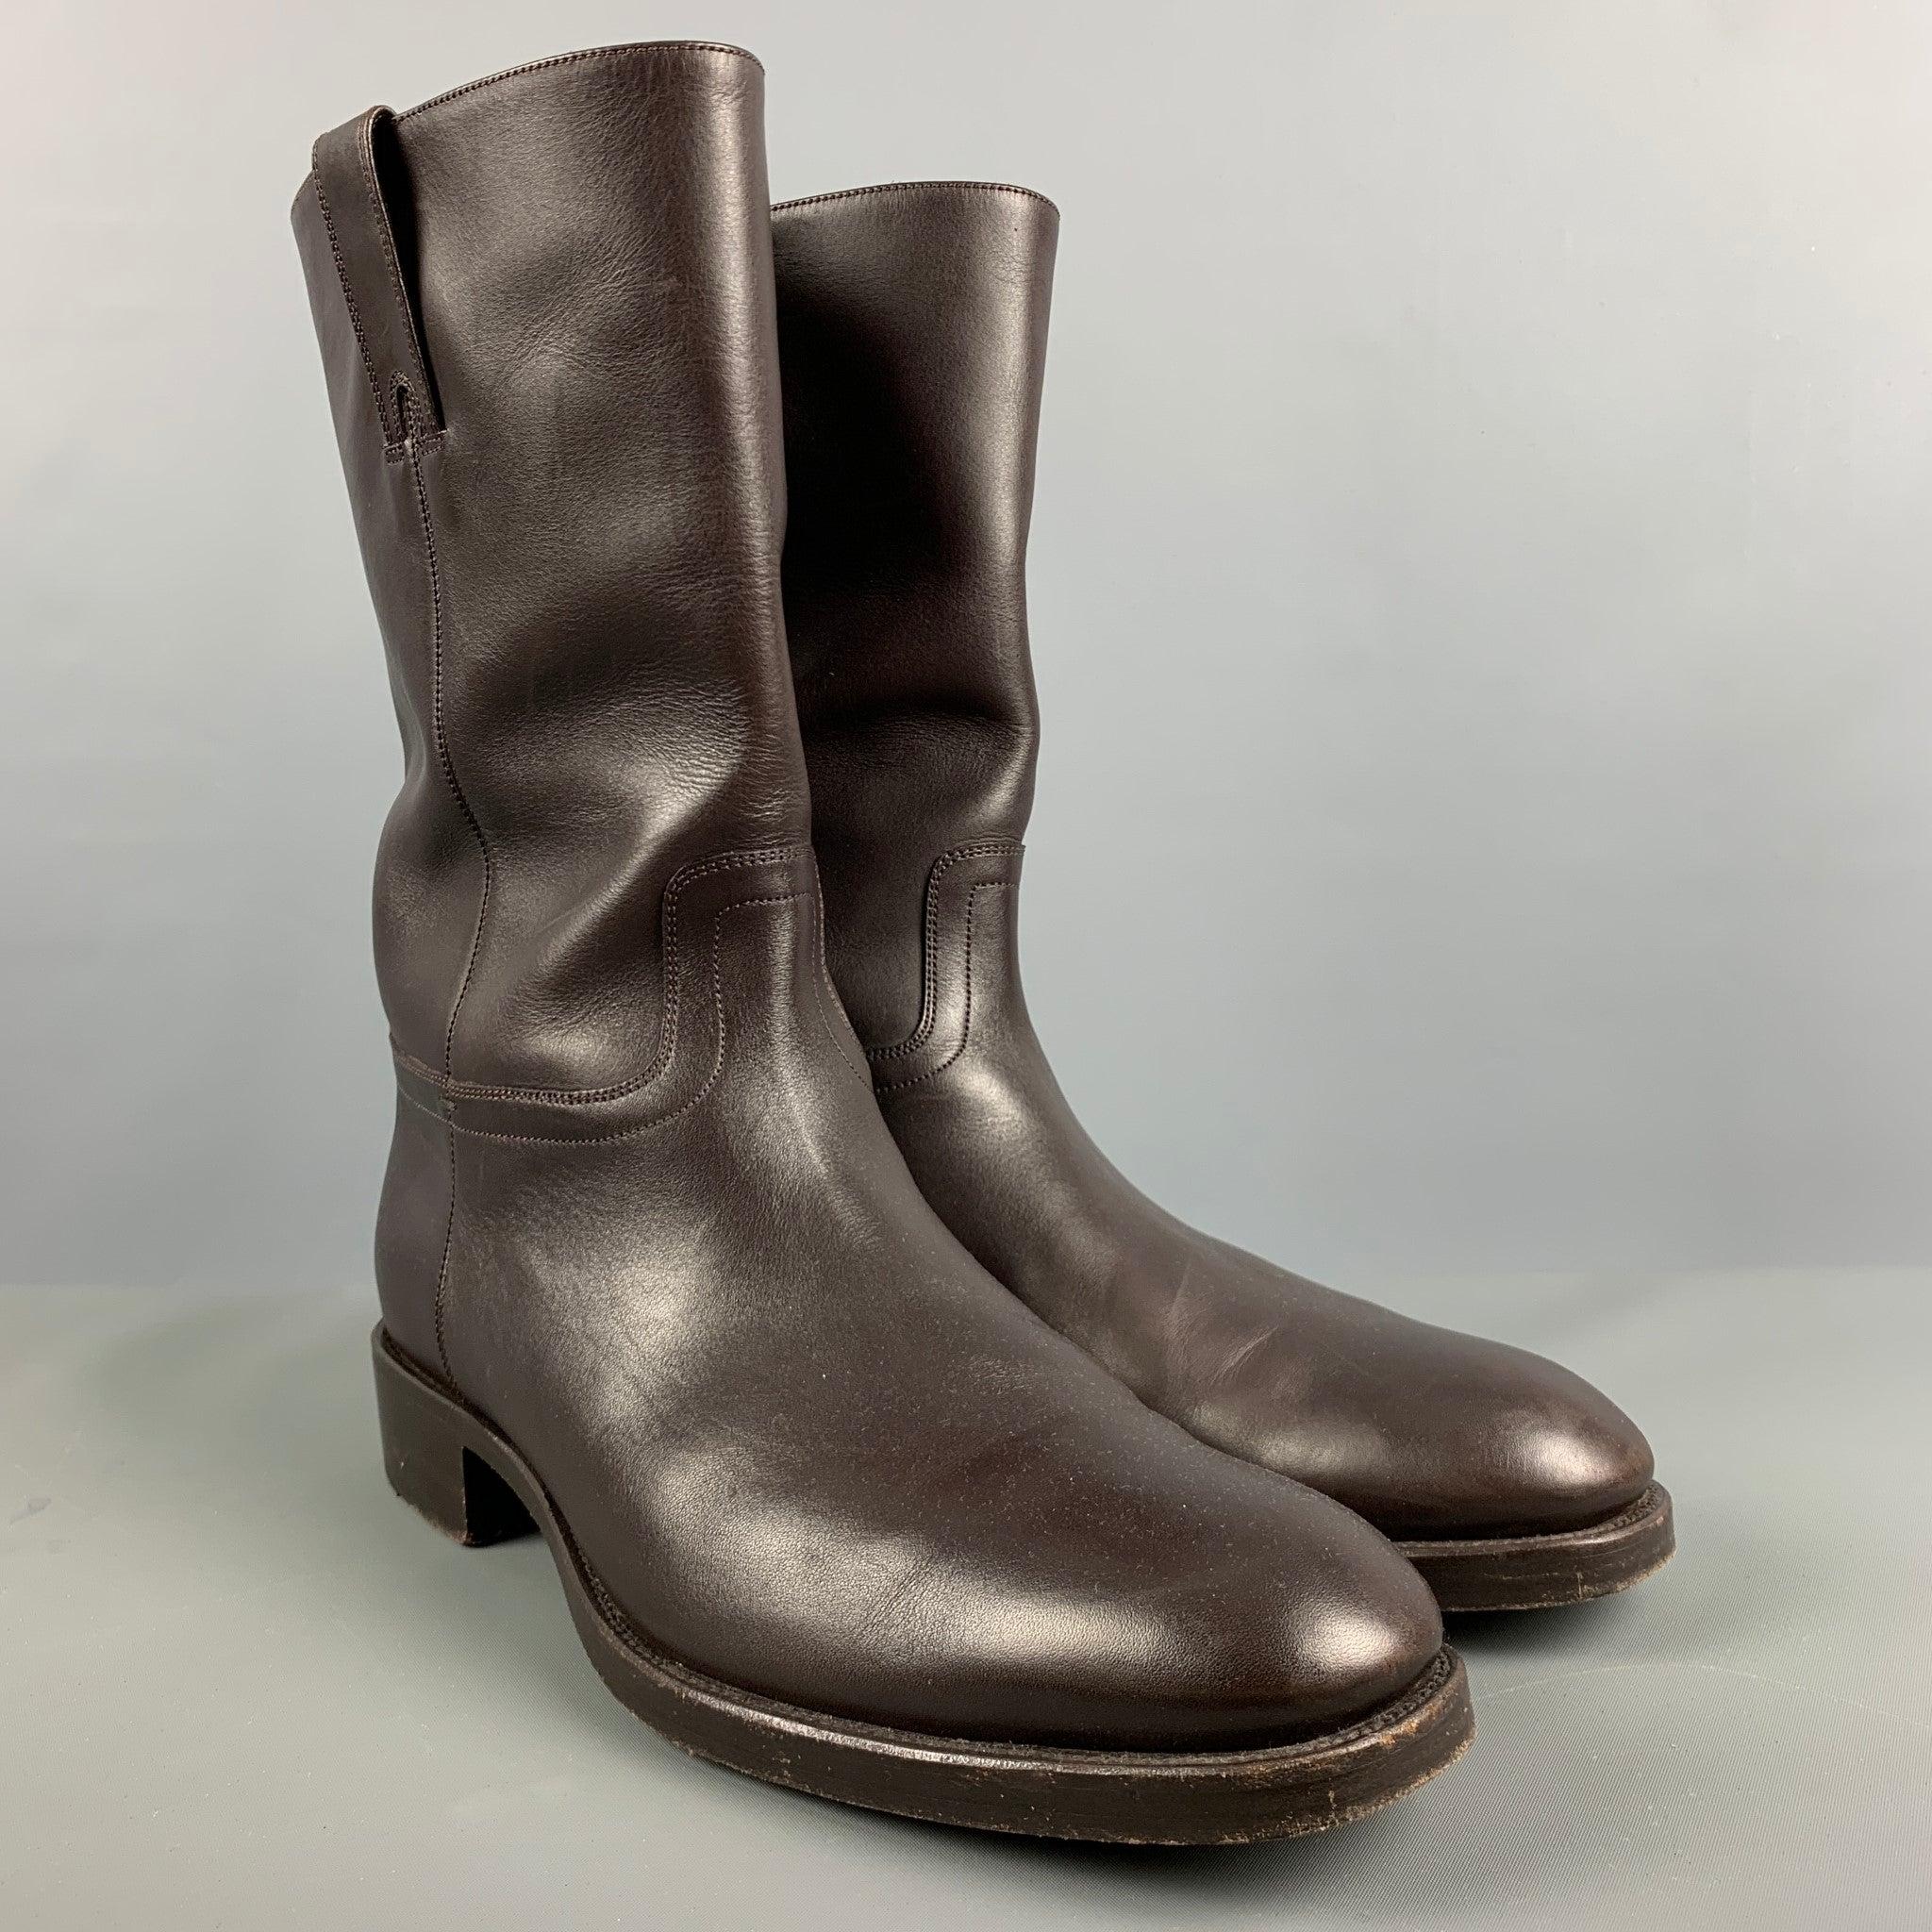 TOM FORD boots in a brown leather fabric featuring pull on style, and wooden soles. Made in Italy.Excellent Pre-Owned Condition. 

Marked:   J0 706 T 10 1/2 T 

Measurements: 
  Length: 12 inches Width: 4.25 inches Height: 12 inches 
 
  
  
